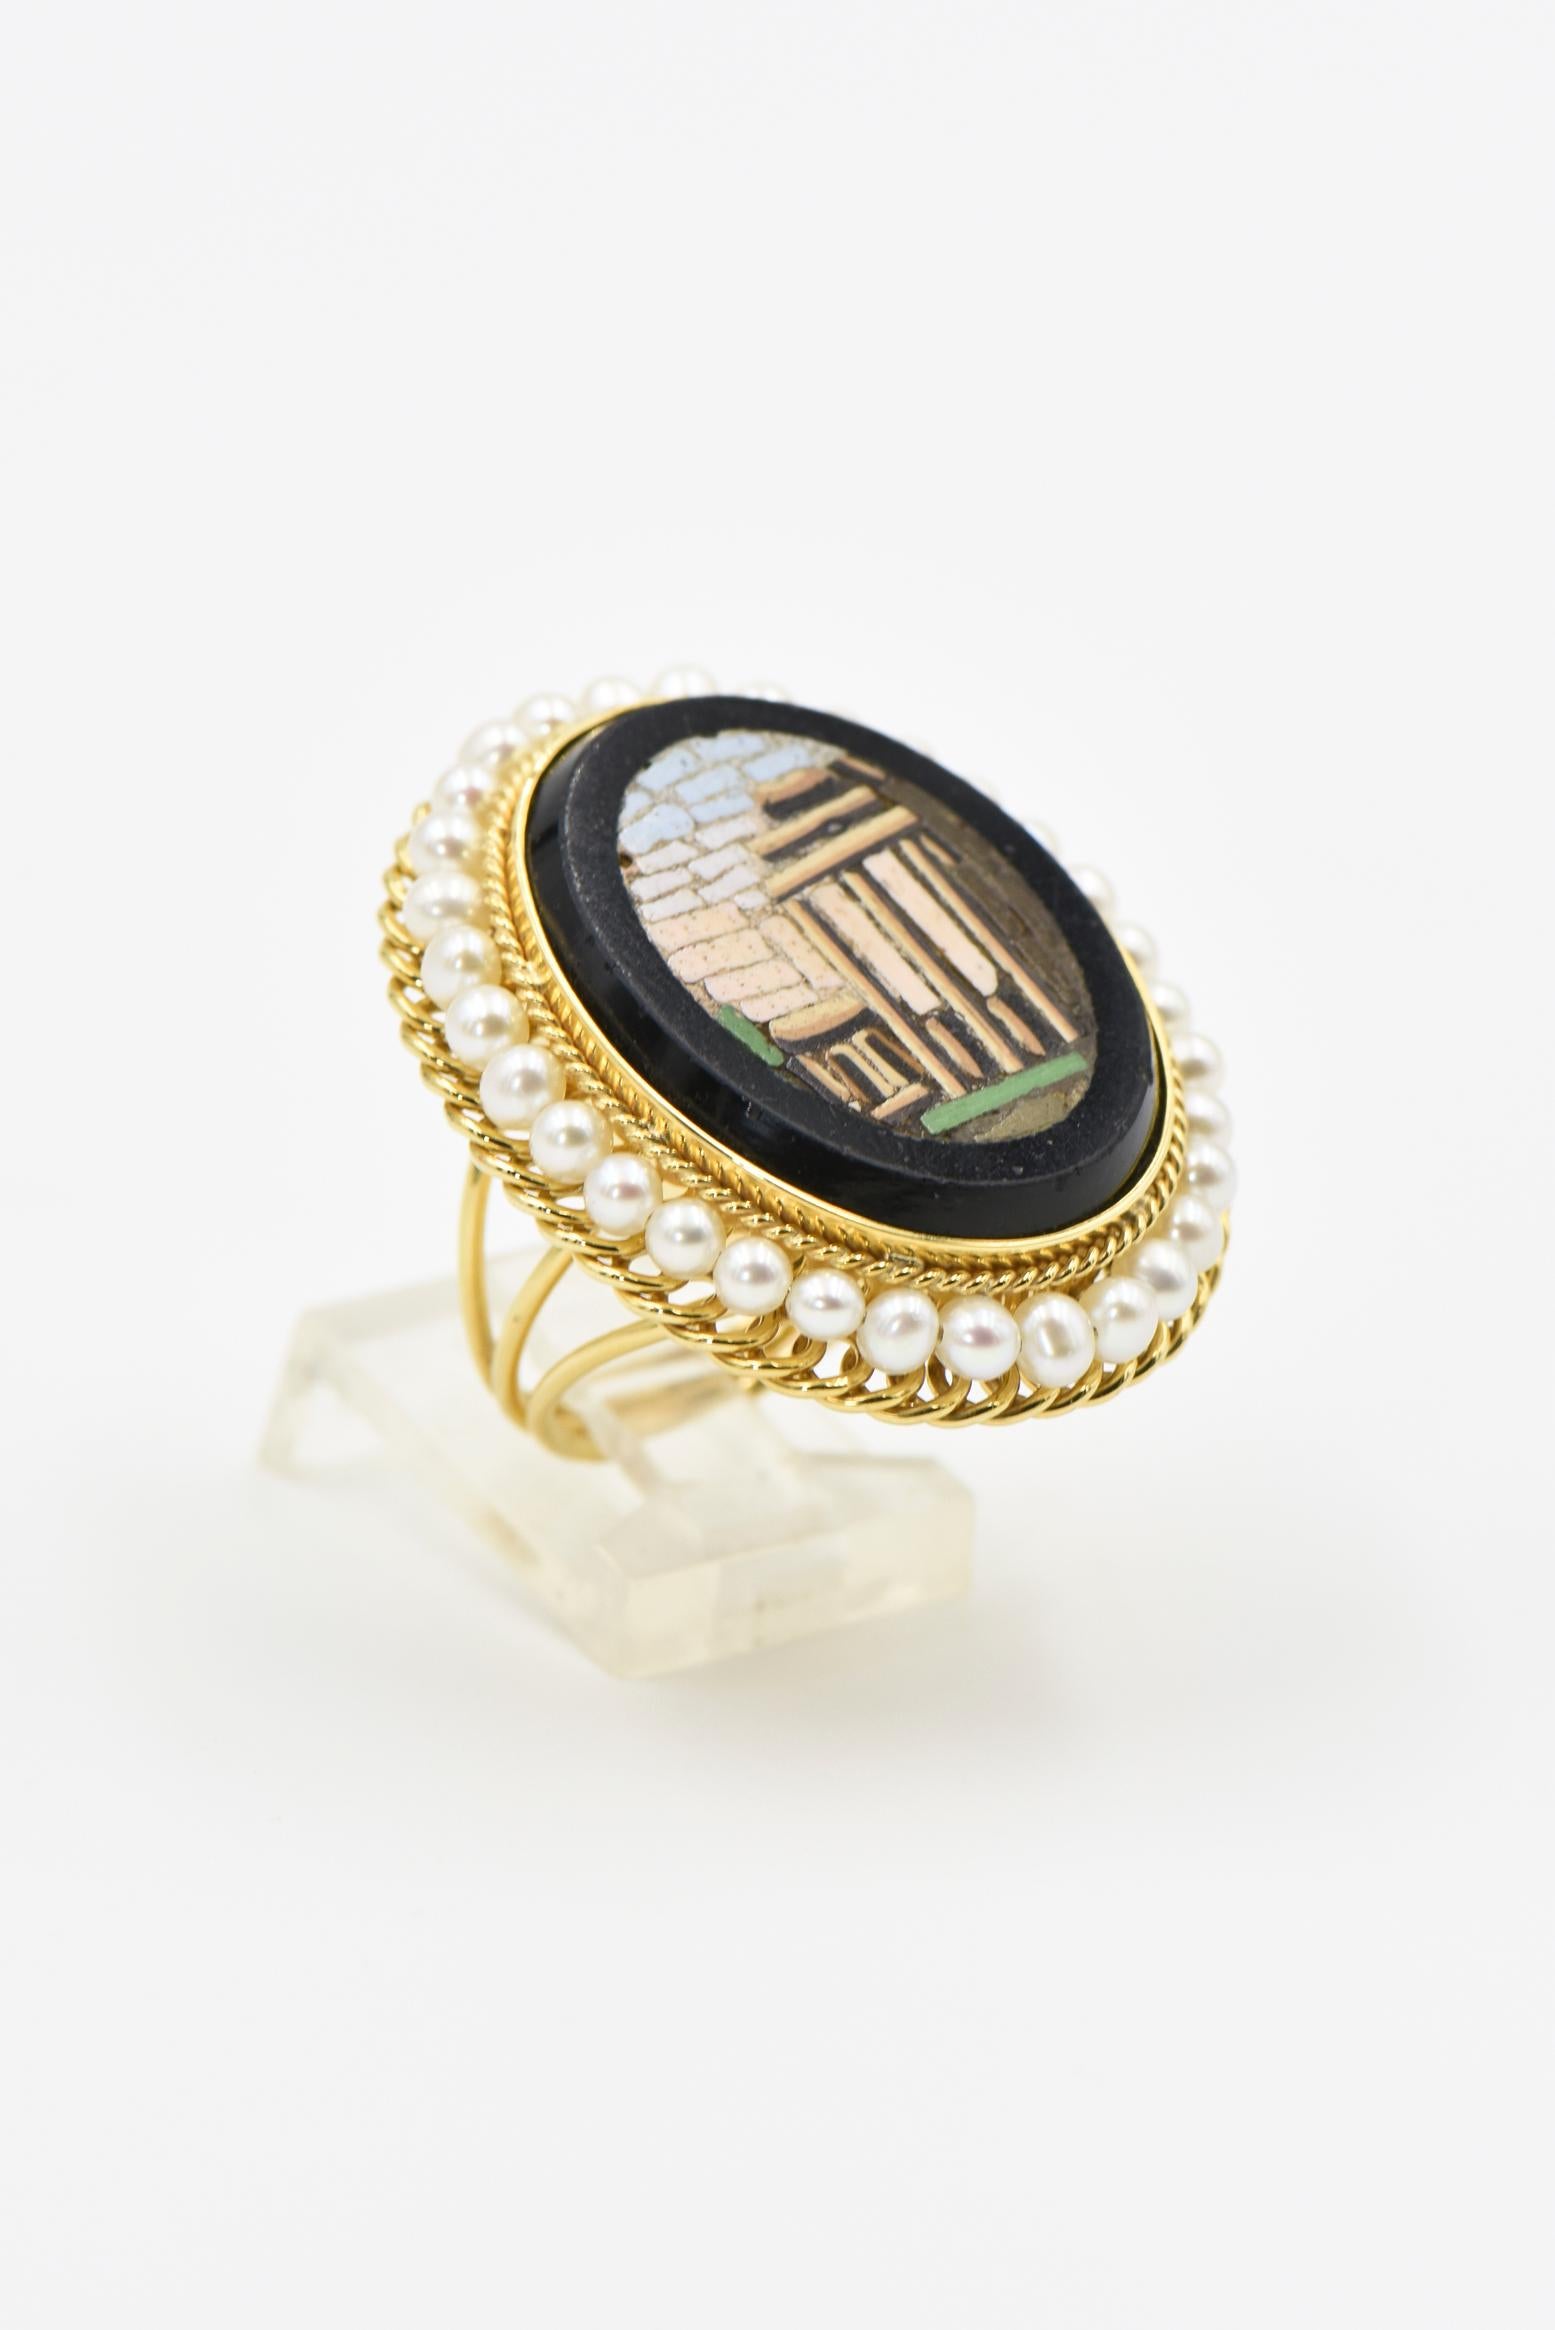 This mid 19th century micromosaic features a Roman scene set into a piece of black marble.   This antique piece was later made into a 14k yellow gold ring. This hand made mounting highlights the design.  The frame has a twisted gold frame then a